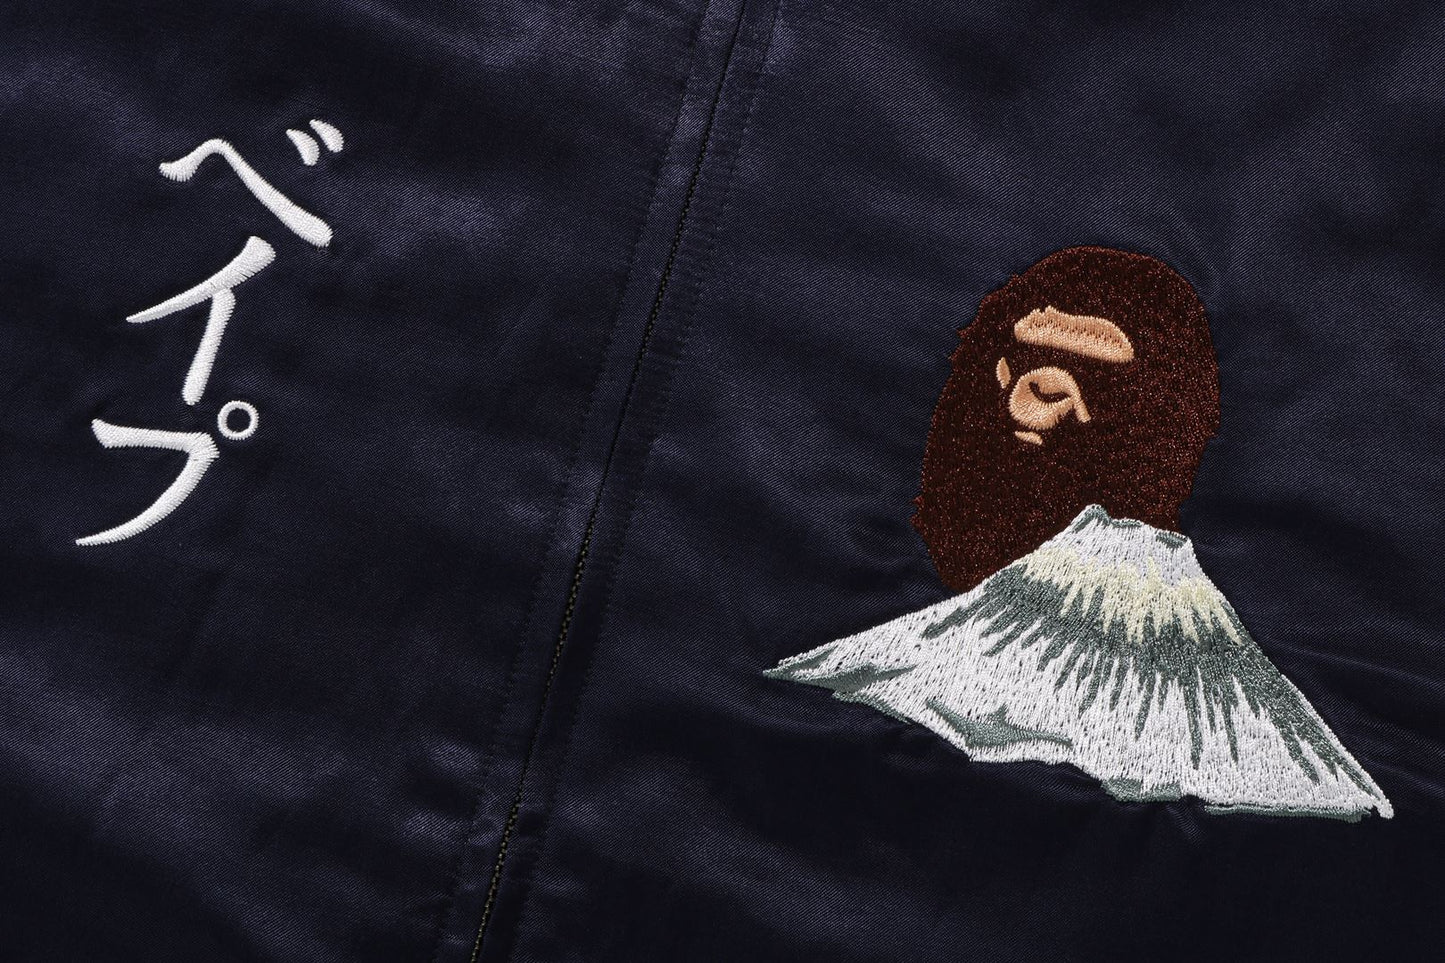 Bape Embroidered Limited Edition Souvenir Jacket